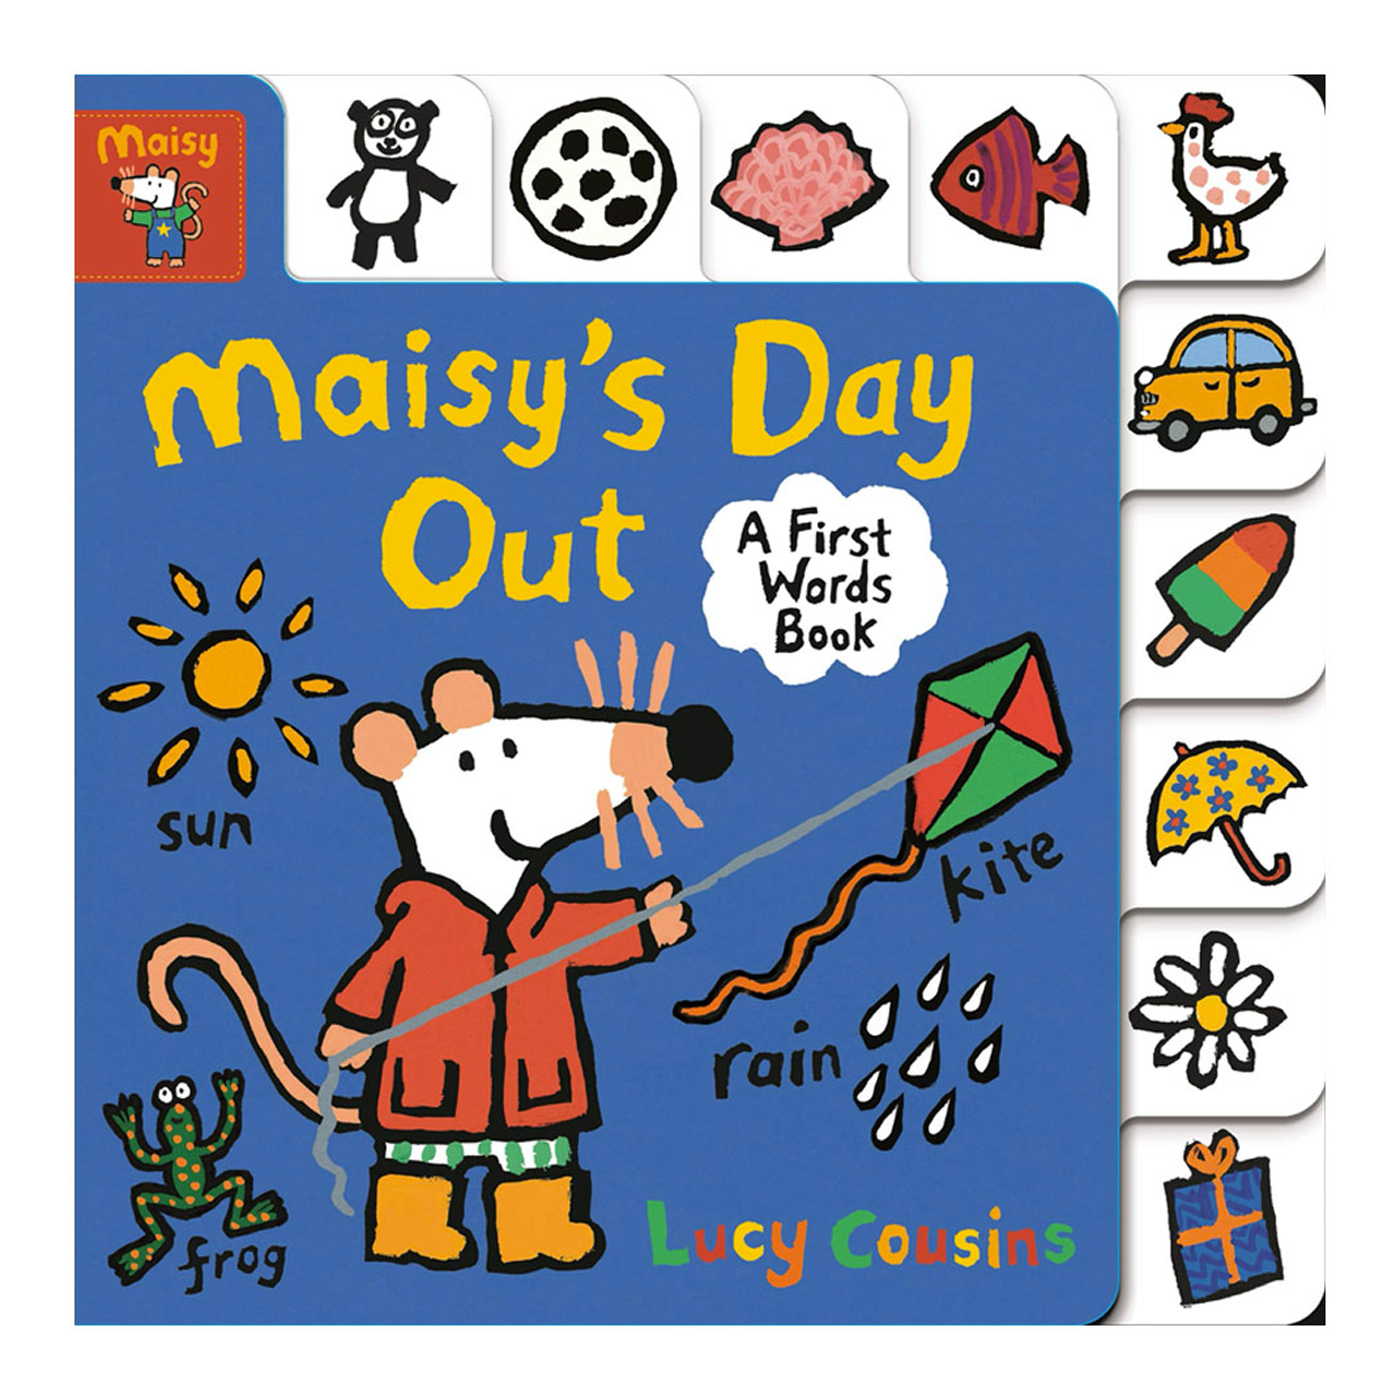  Maisy's Day Out: A First Words Book